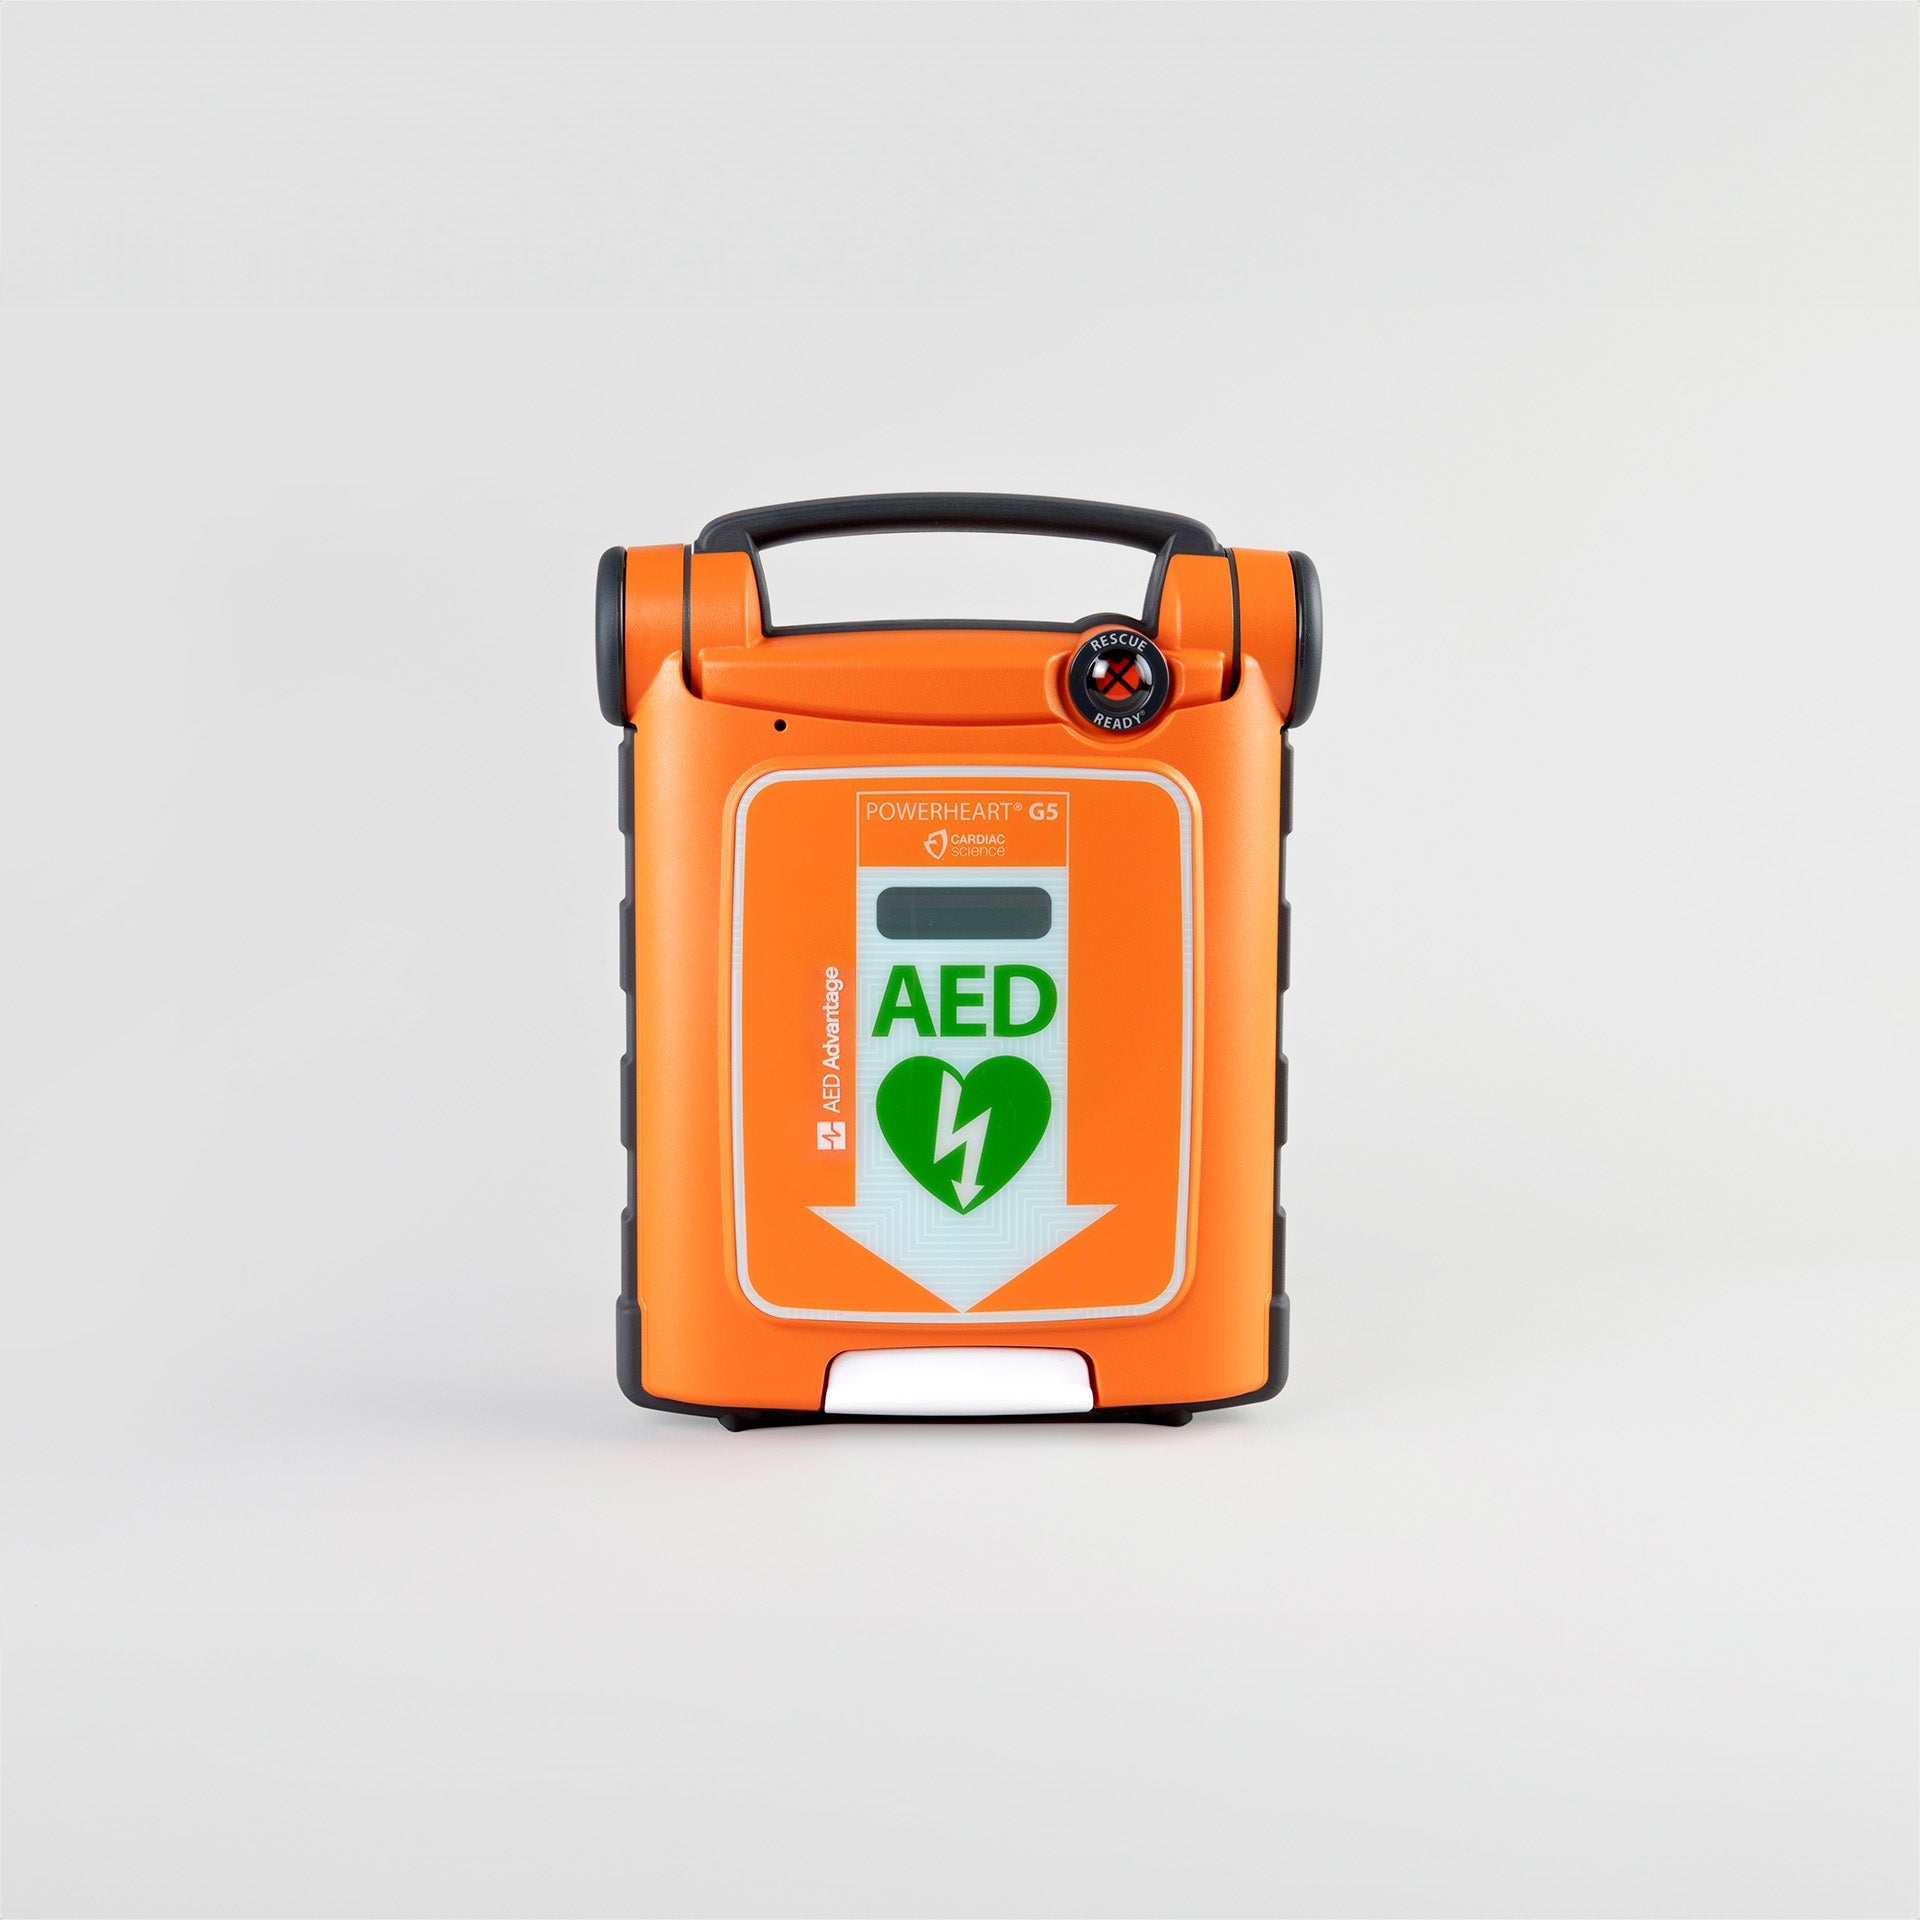 A bright orange Powerheart G5 AED with a gray carry handle. 